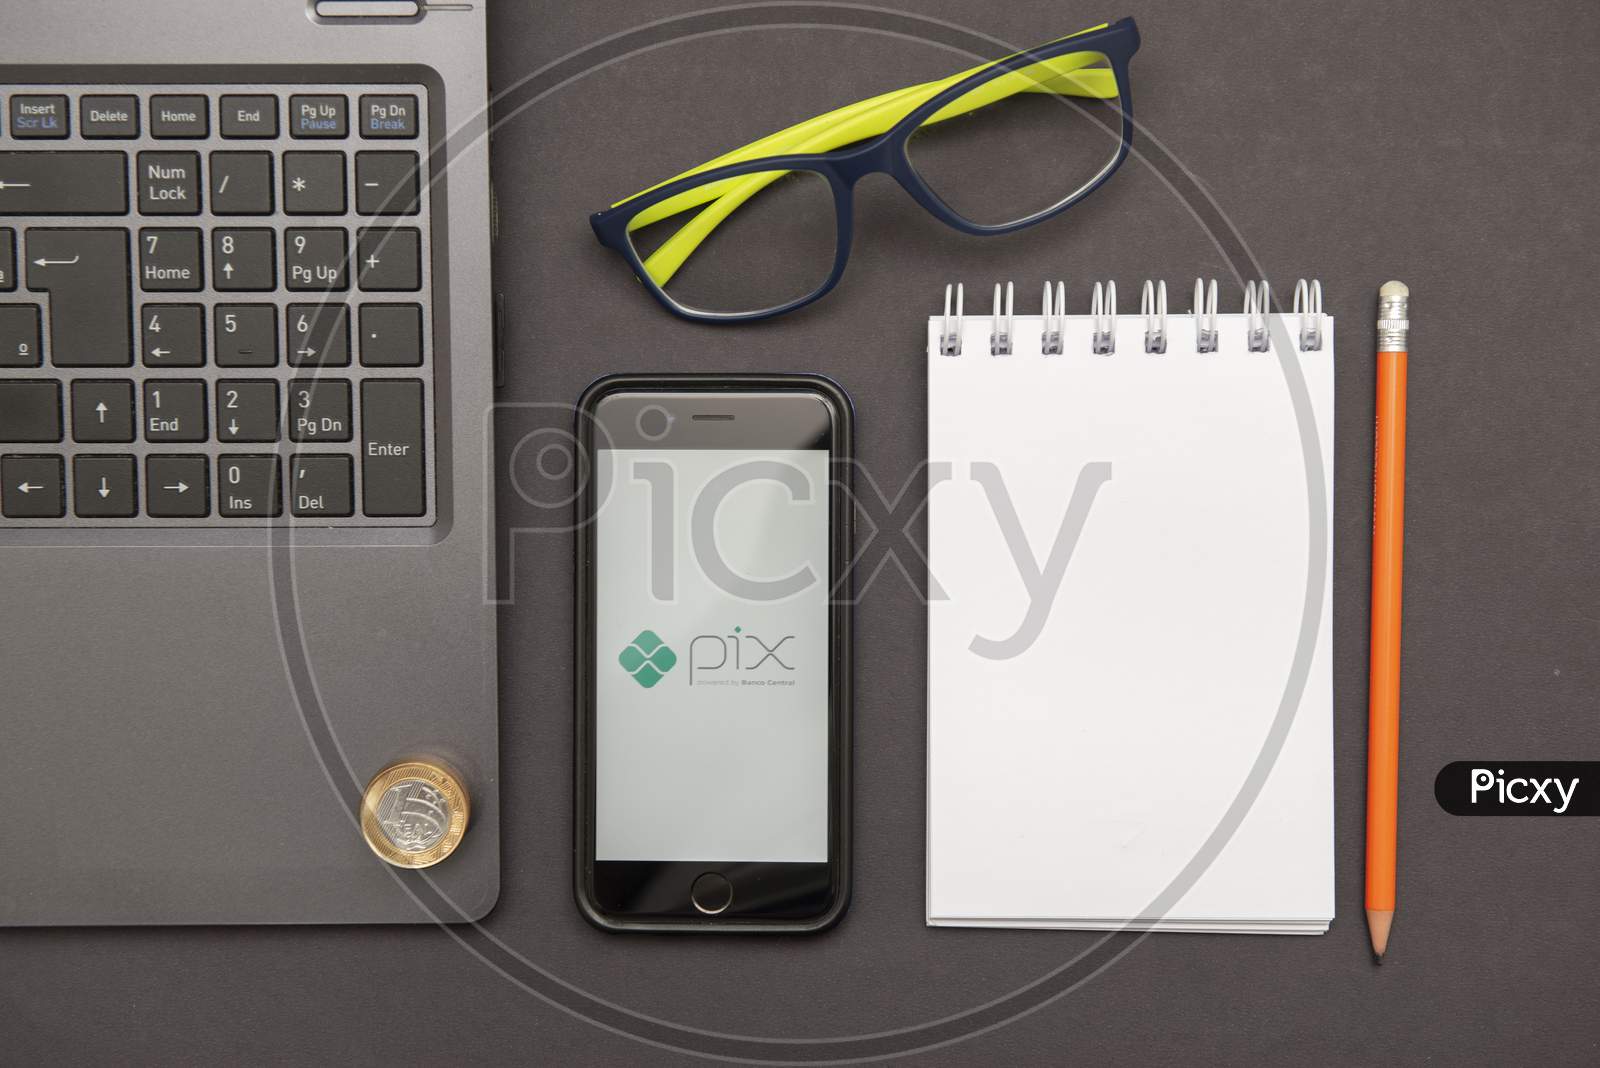 Florianopolis, Brazil. 28/09/2020: Top View Of Pix Logo On Smartphone Screen, Notepad Glasses And Notebook On The Black Table. Pix, New Brazilian Electronic Payment System. Brazilian Central Bank.